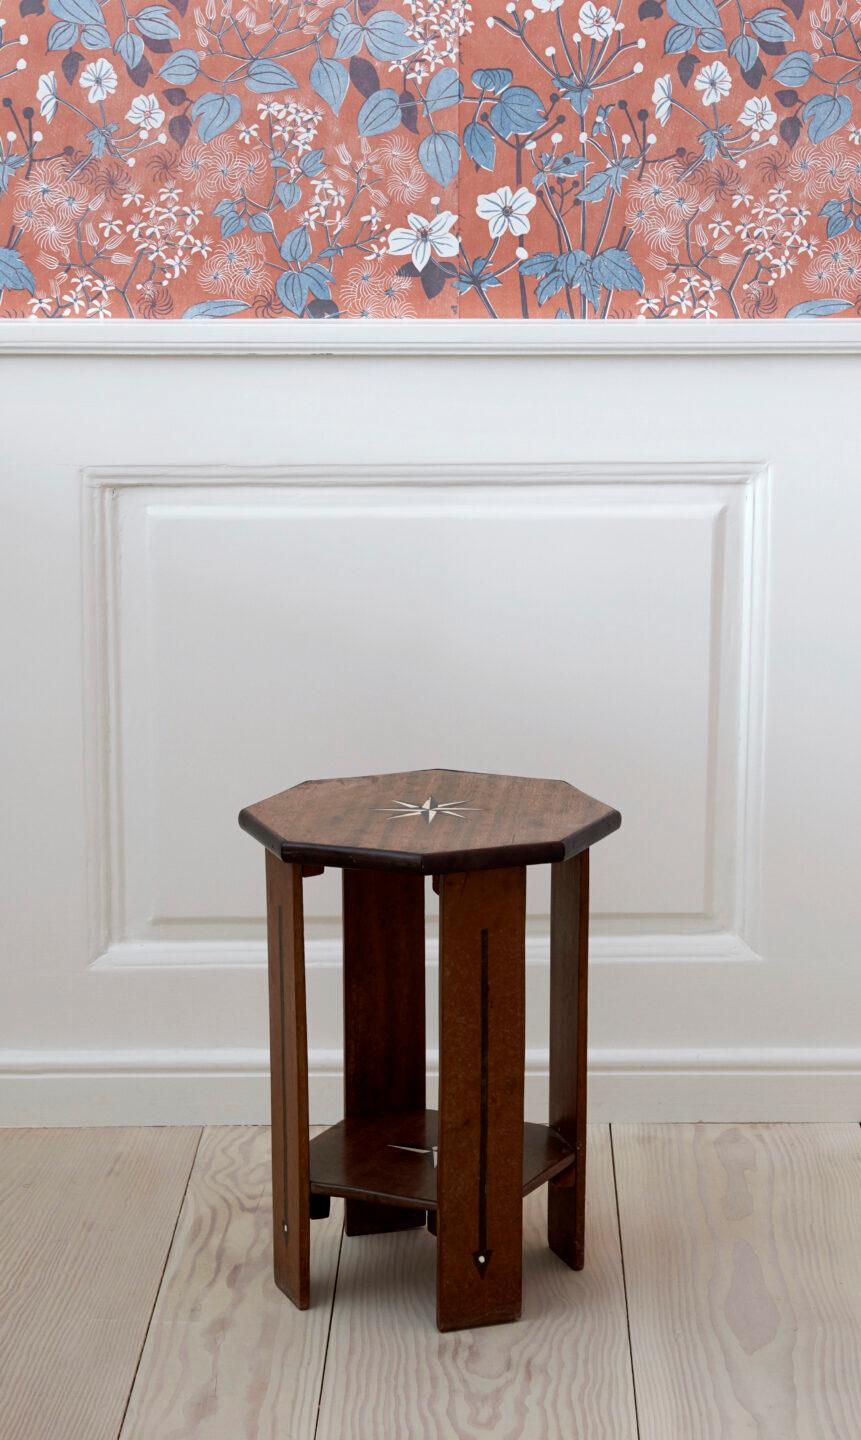 England, 1930s

Small octagonal table in teak with ebony and bone inlay.

Measures: H 41 x Ø 33 cm.